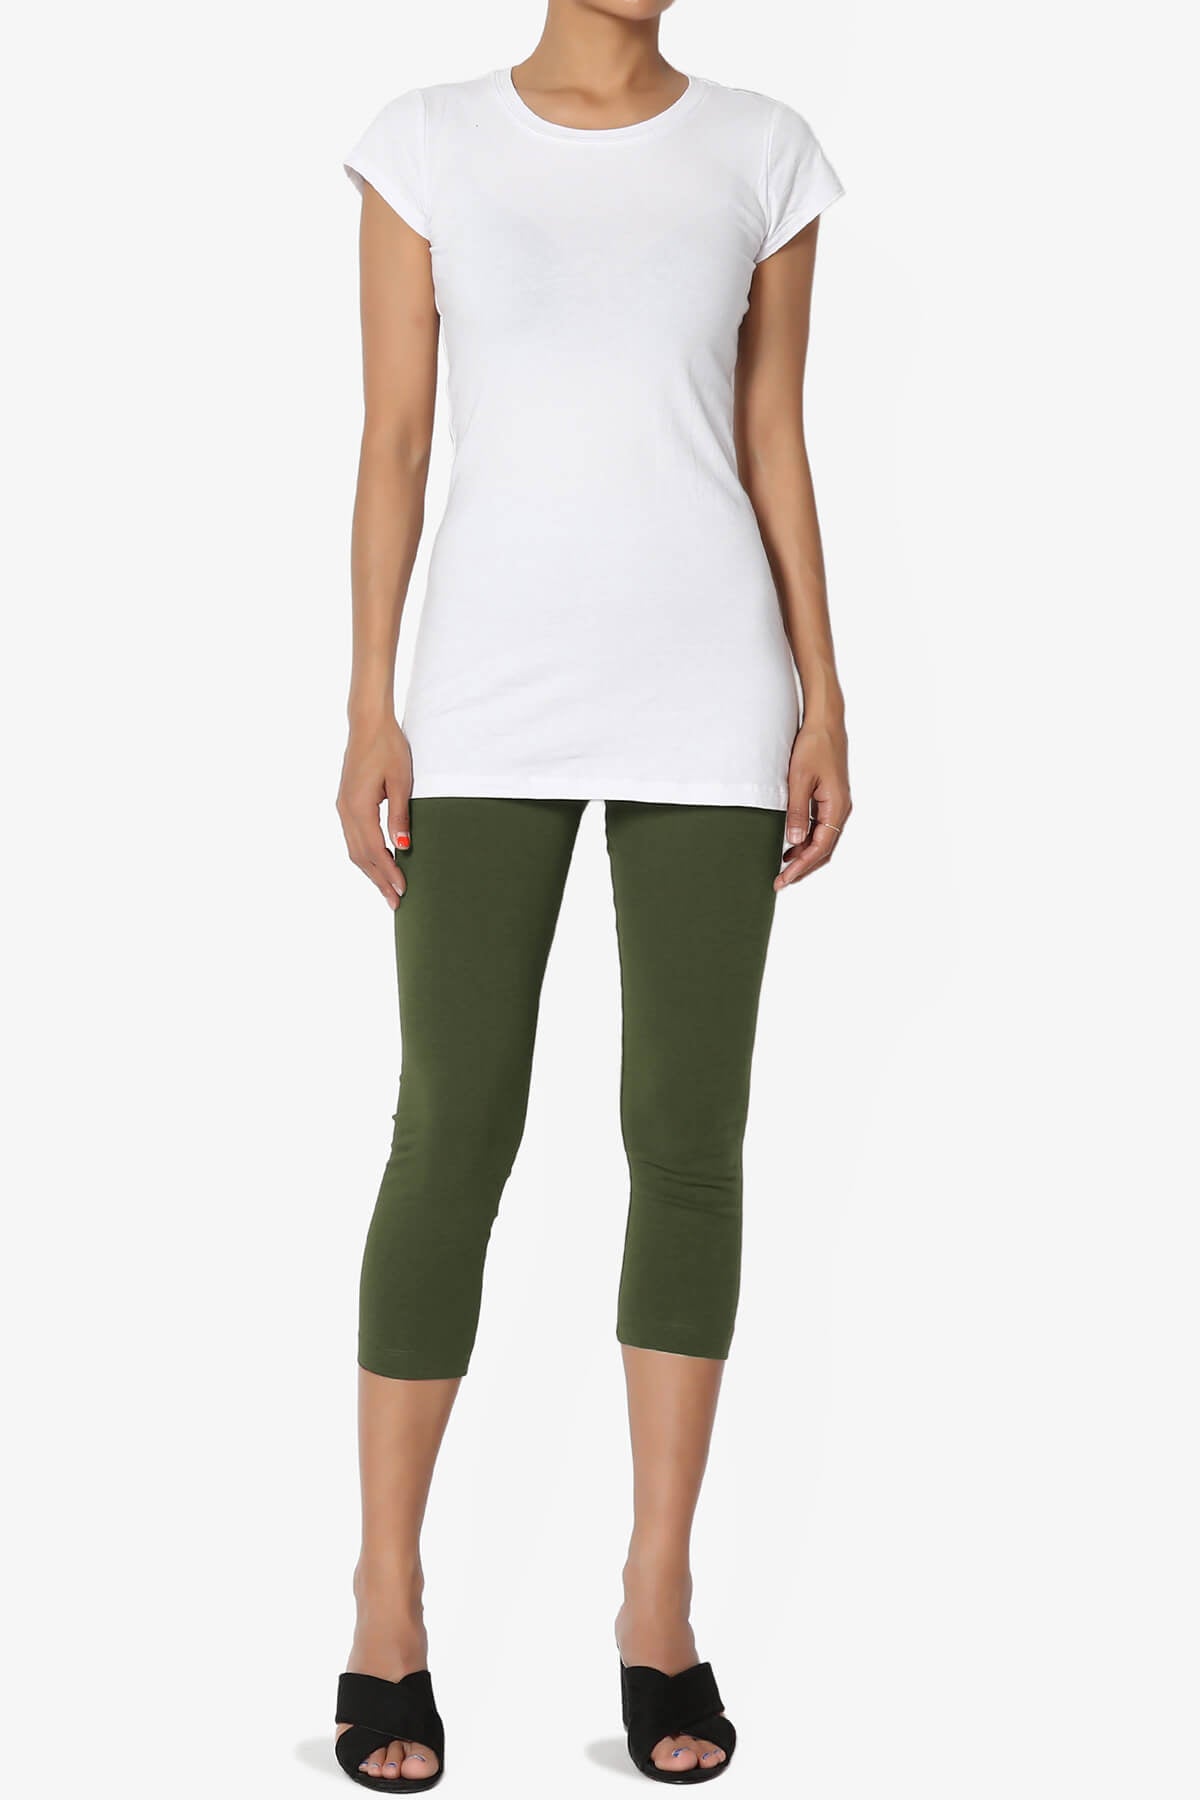 Load image into Gallery viewer, Thalia Cotton Jersey Capri Leggings ARMY GREEN_6
